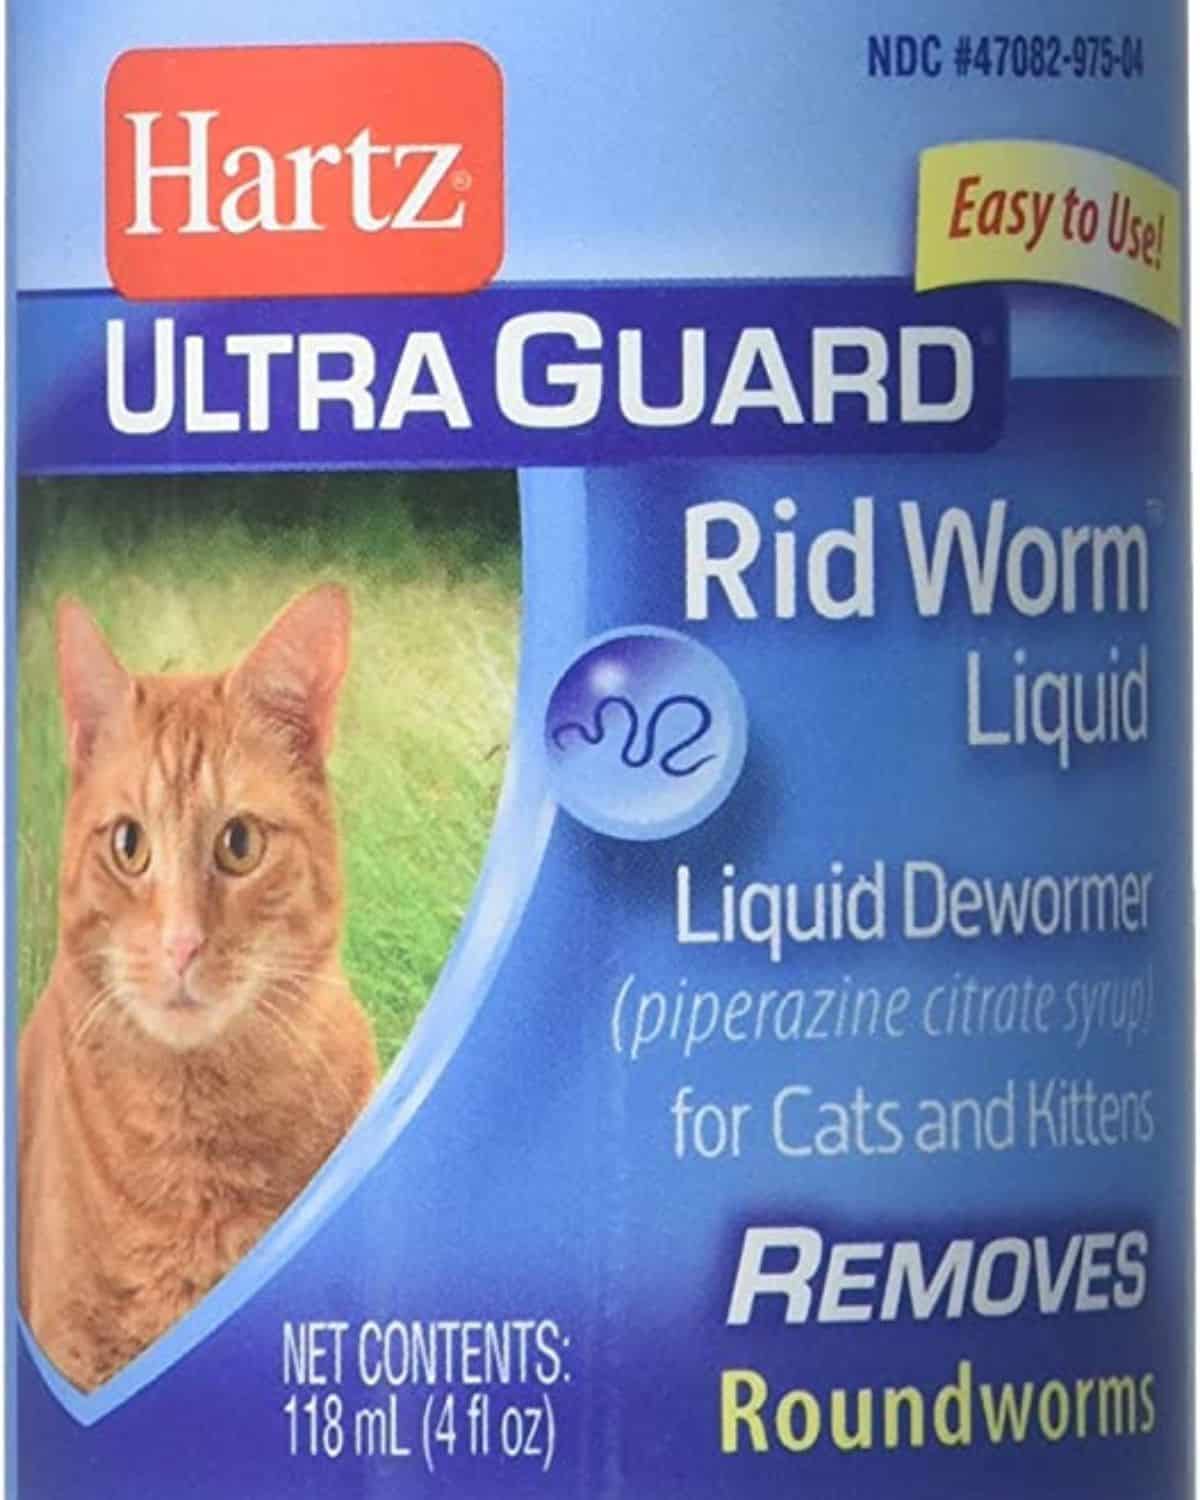 Hartz UltraGuard Rid Worm Dewormer for Roundworms for Cats